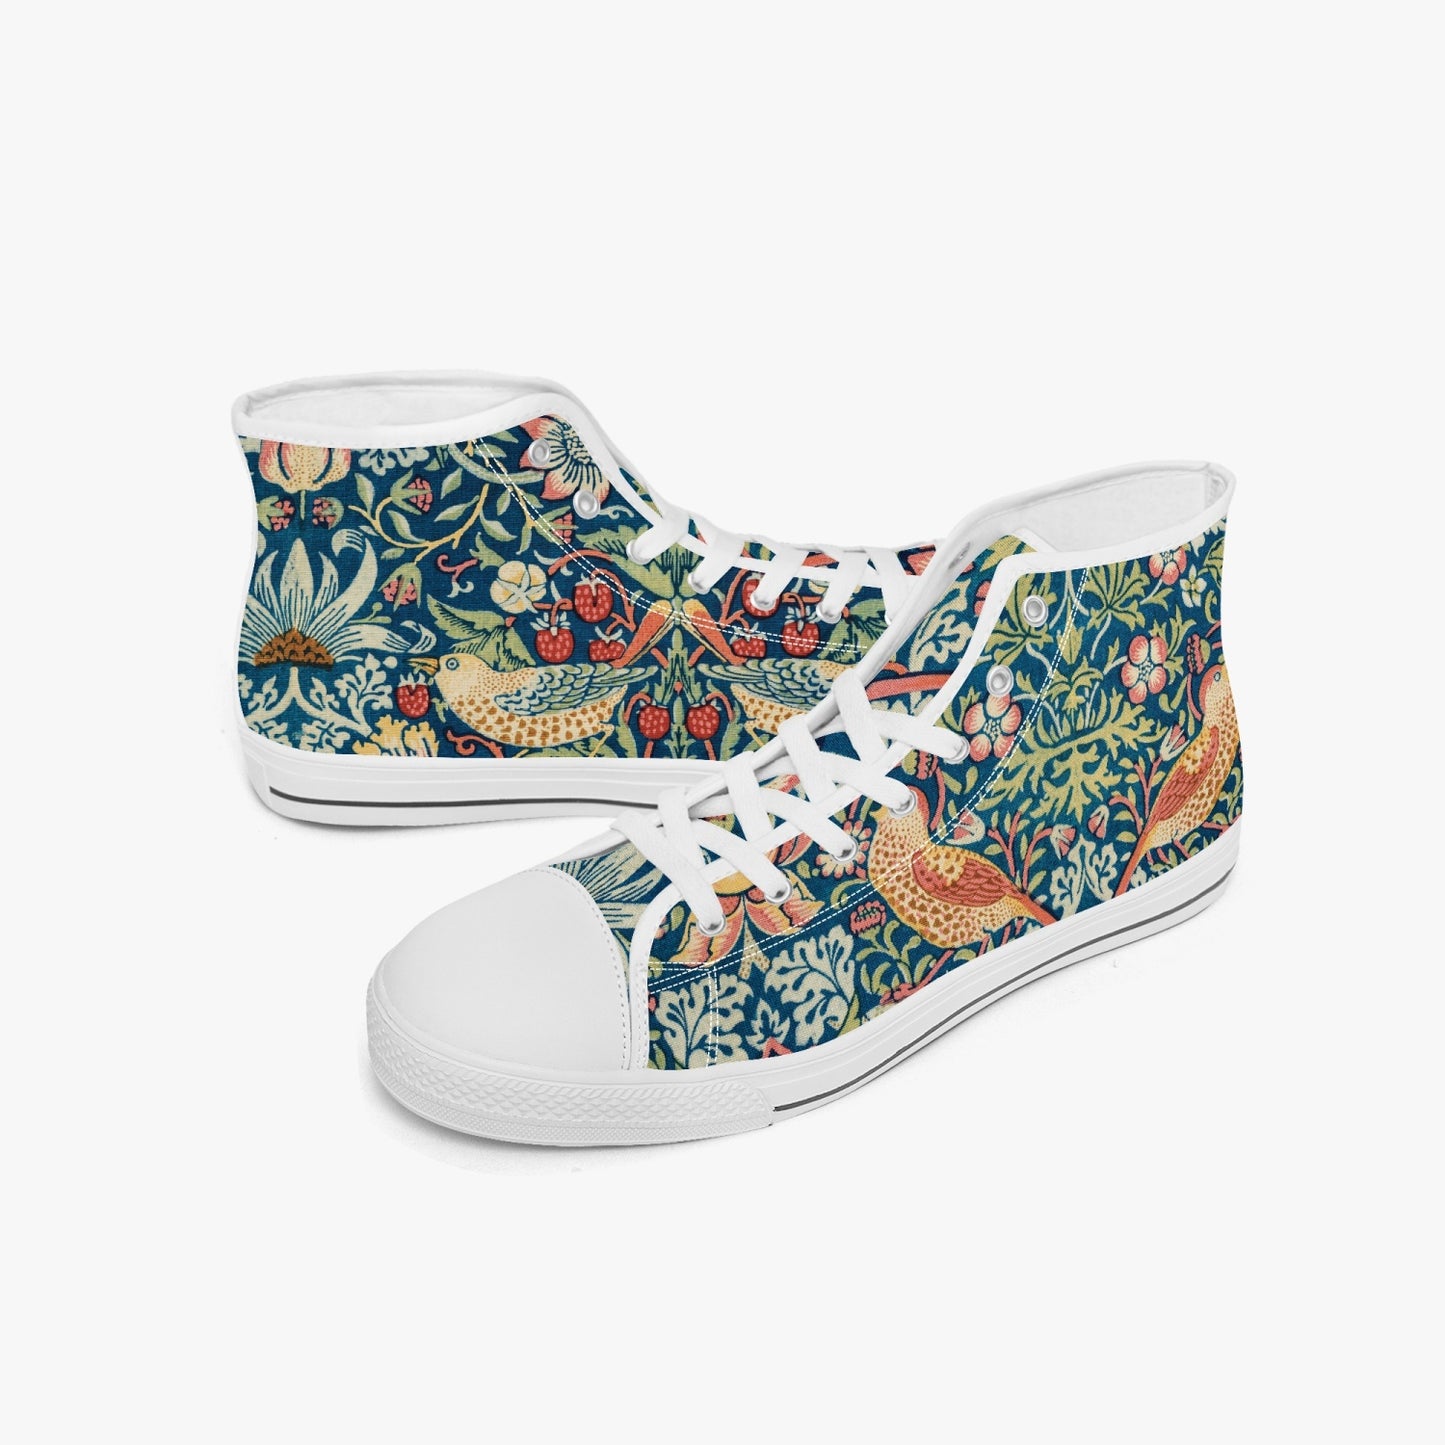 Flowered Sneakers: Canvas High-Tops with Strawberry Thief William Morris Wallpaper Design